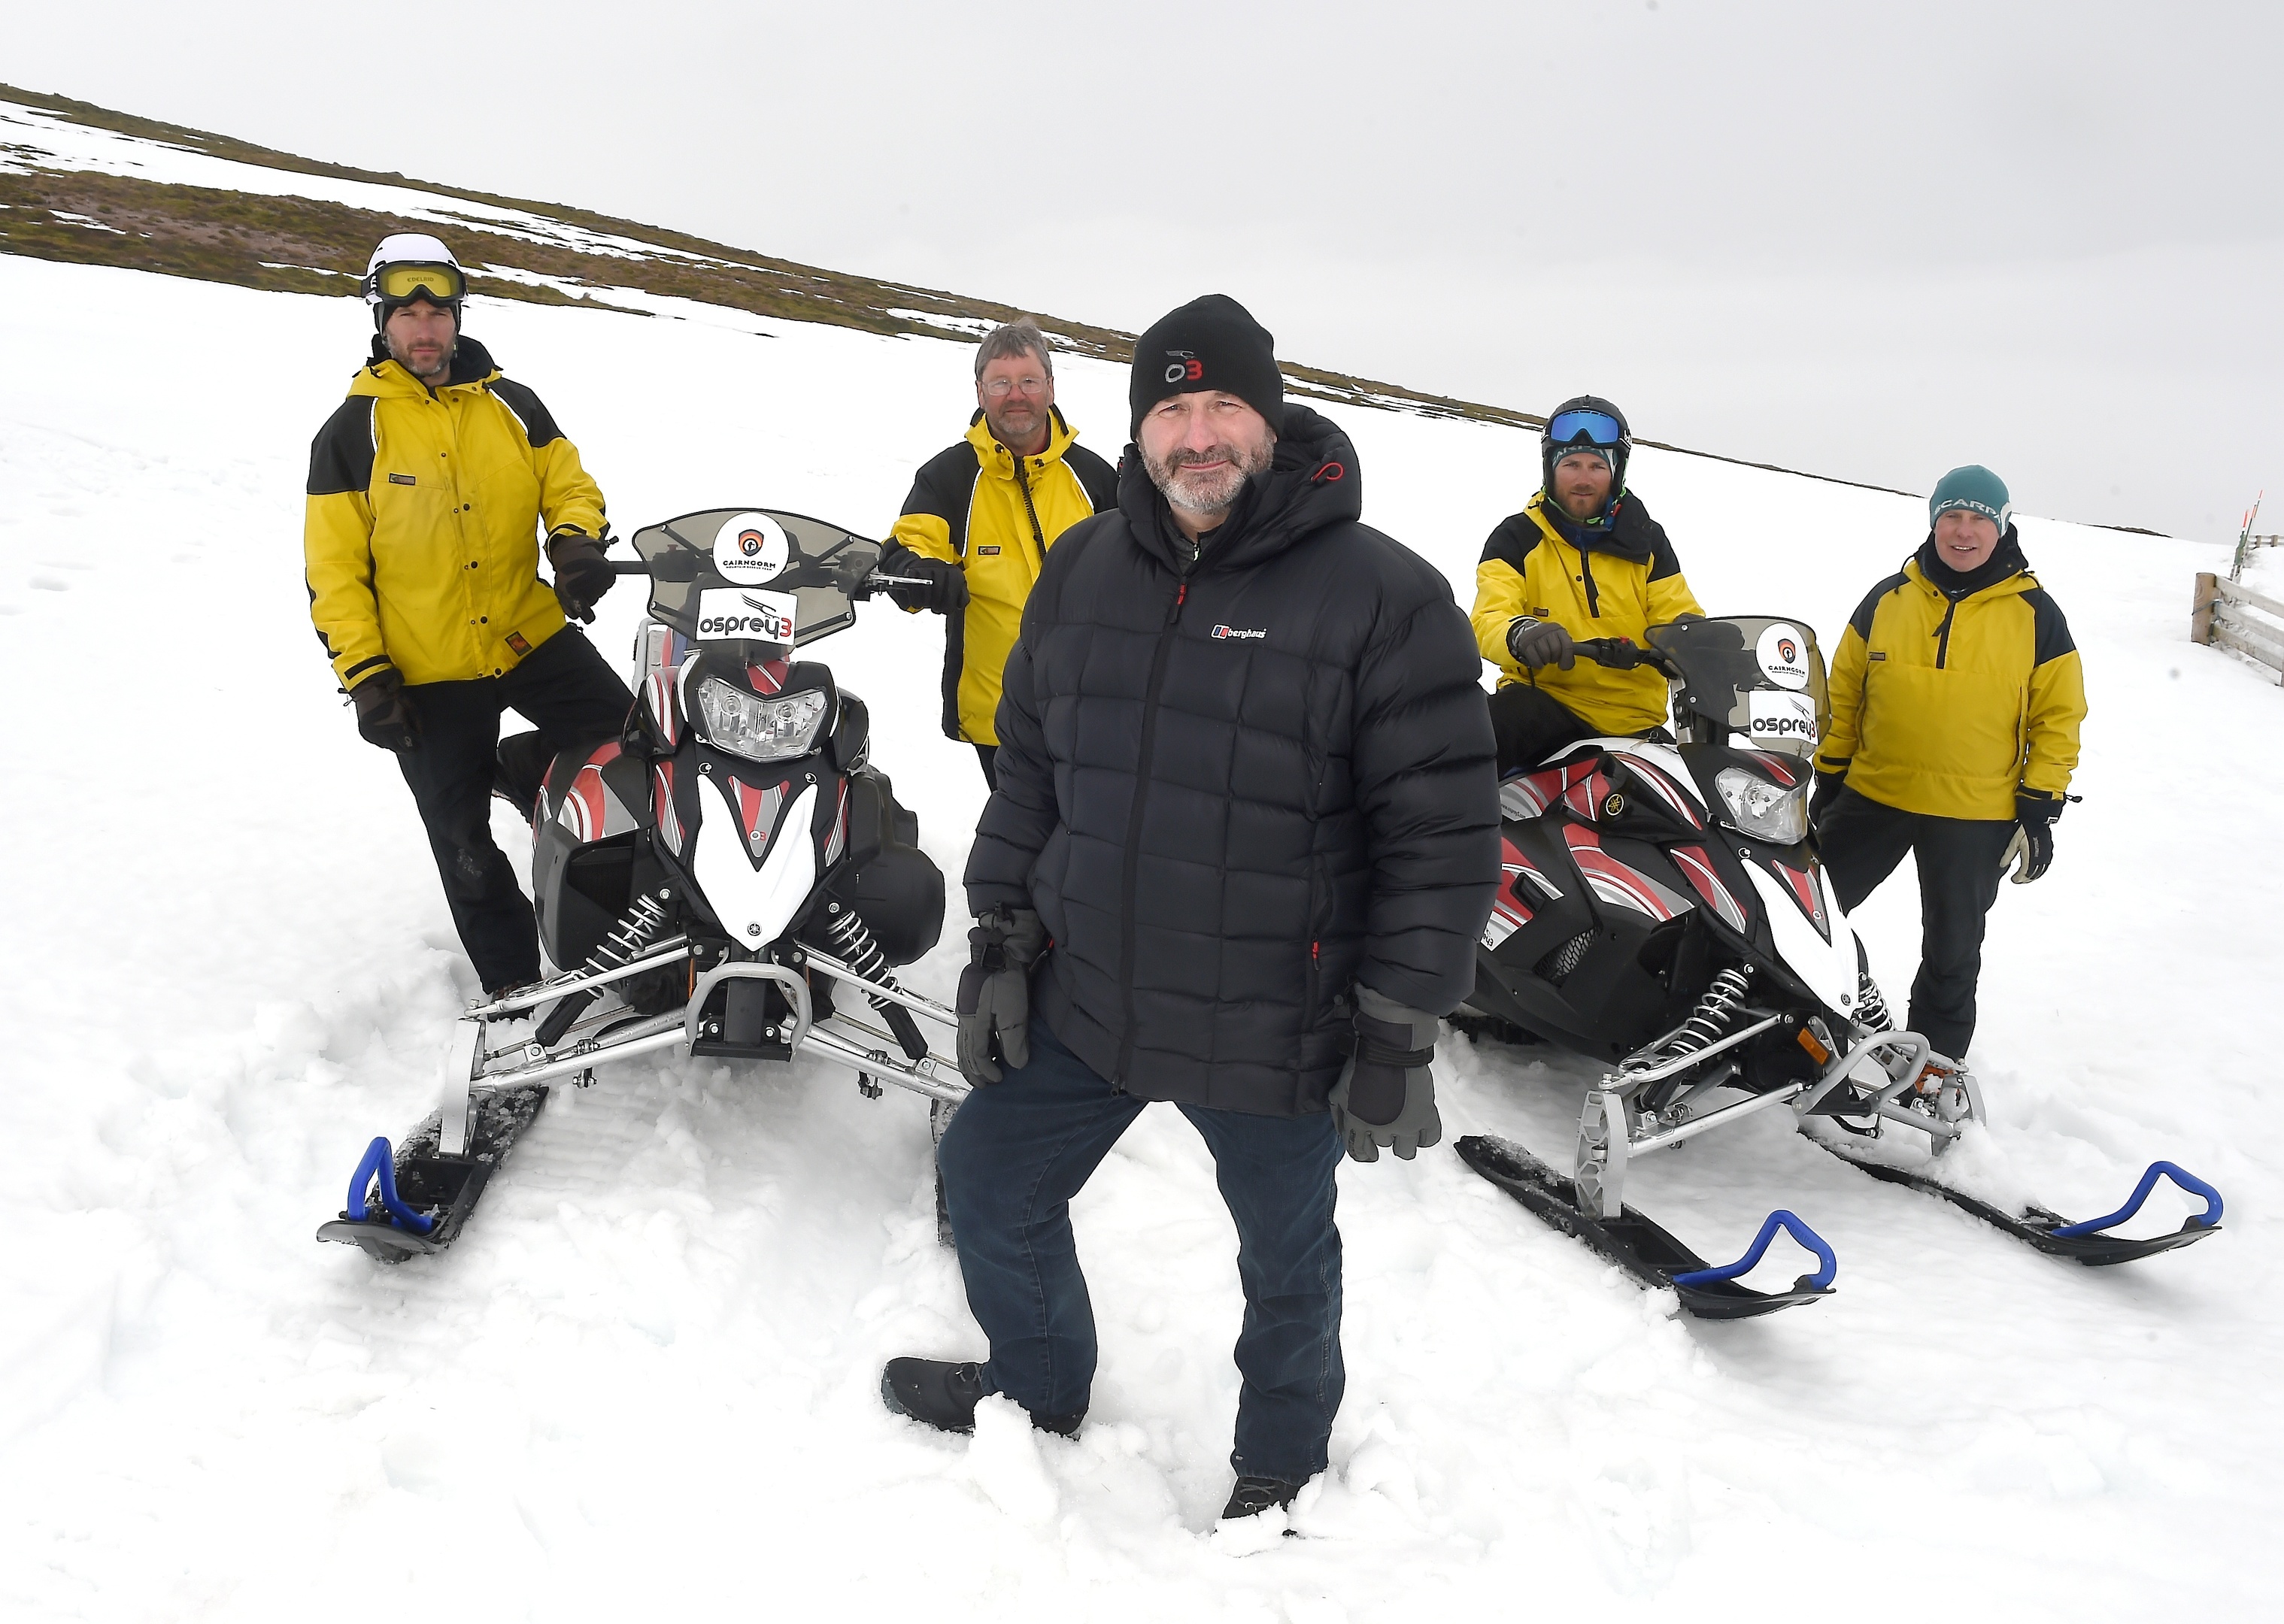 The Cairngorm Mountain Rescue Team  have been presented with two new snow scooters by Andy Clark and Laura Hepburn of Osprey3